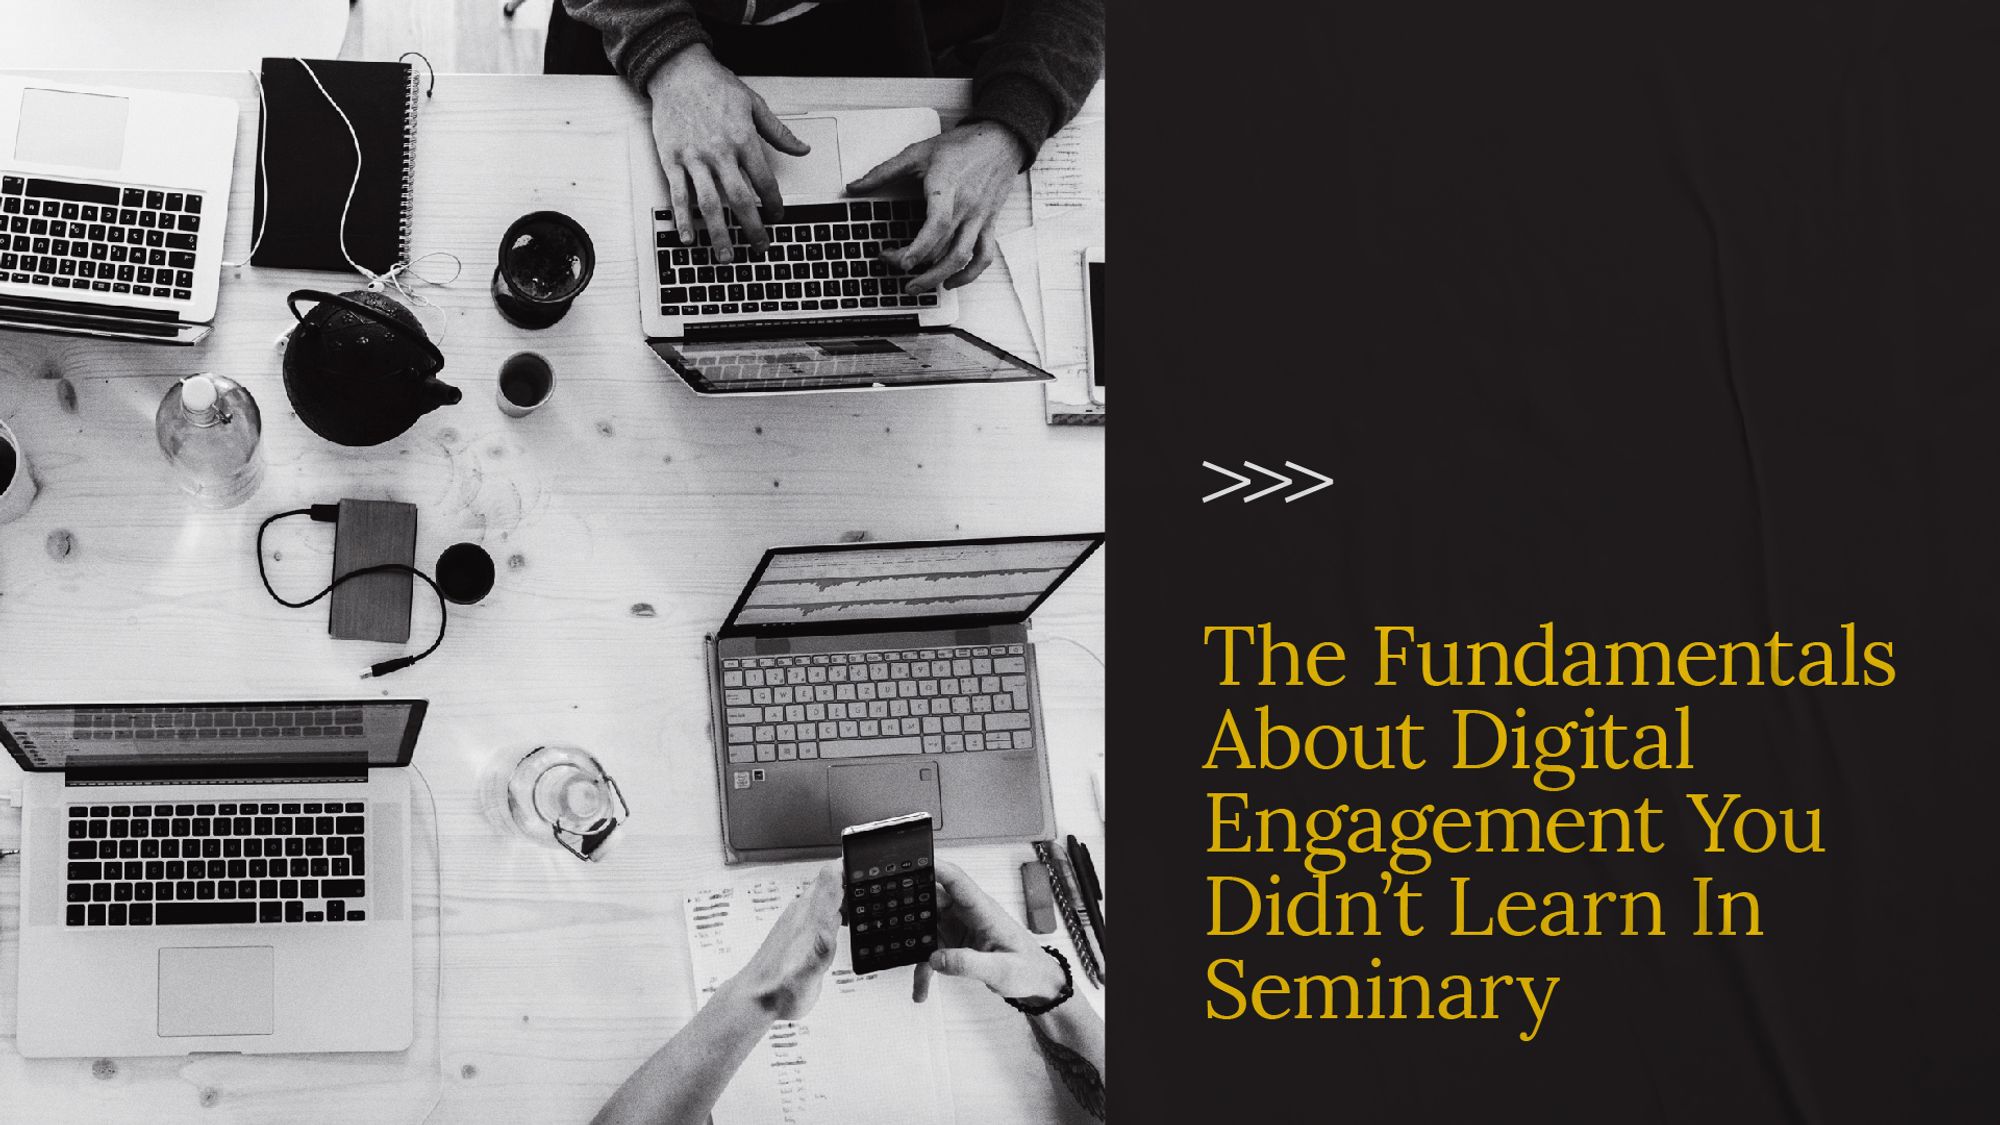 The Fundamentals About Digital Engagement You Didn't Learn In Seminary